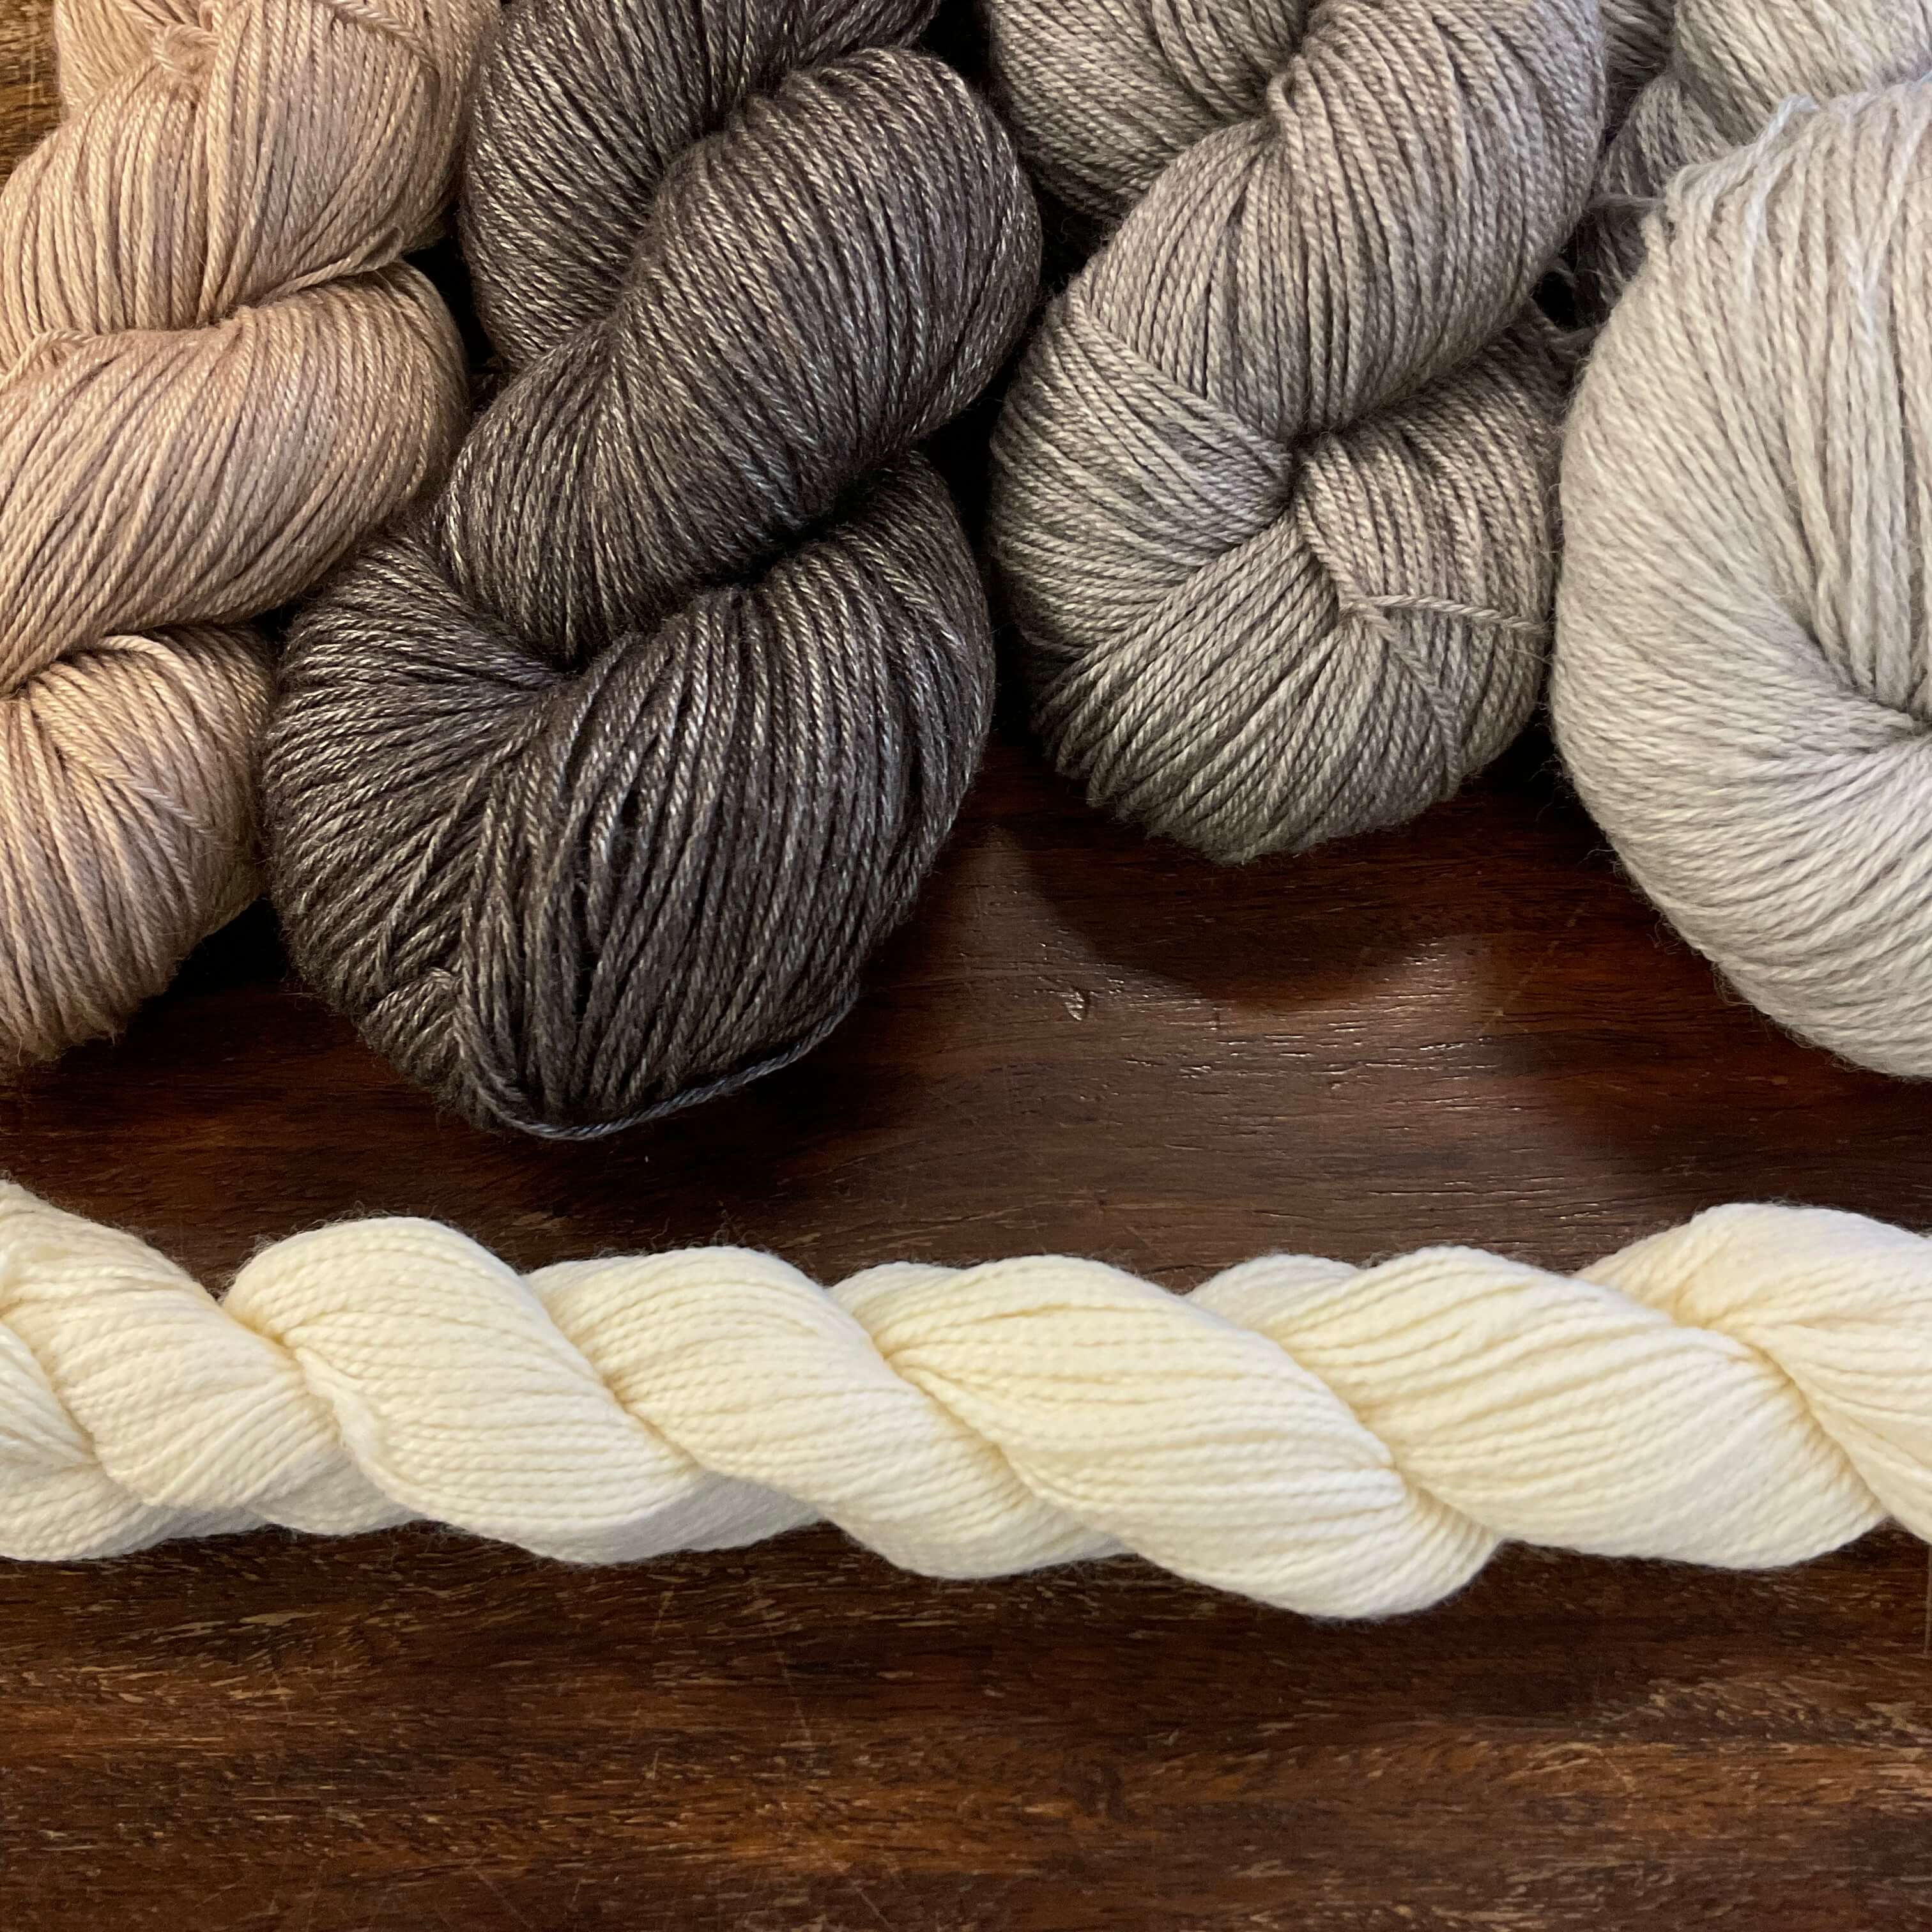 Undyed Collection of 4ply yarns from Chester Wool – The Woolly Brew